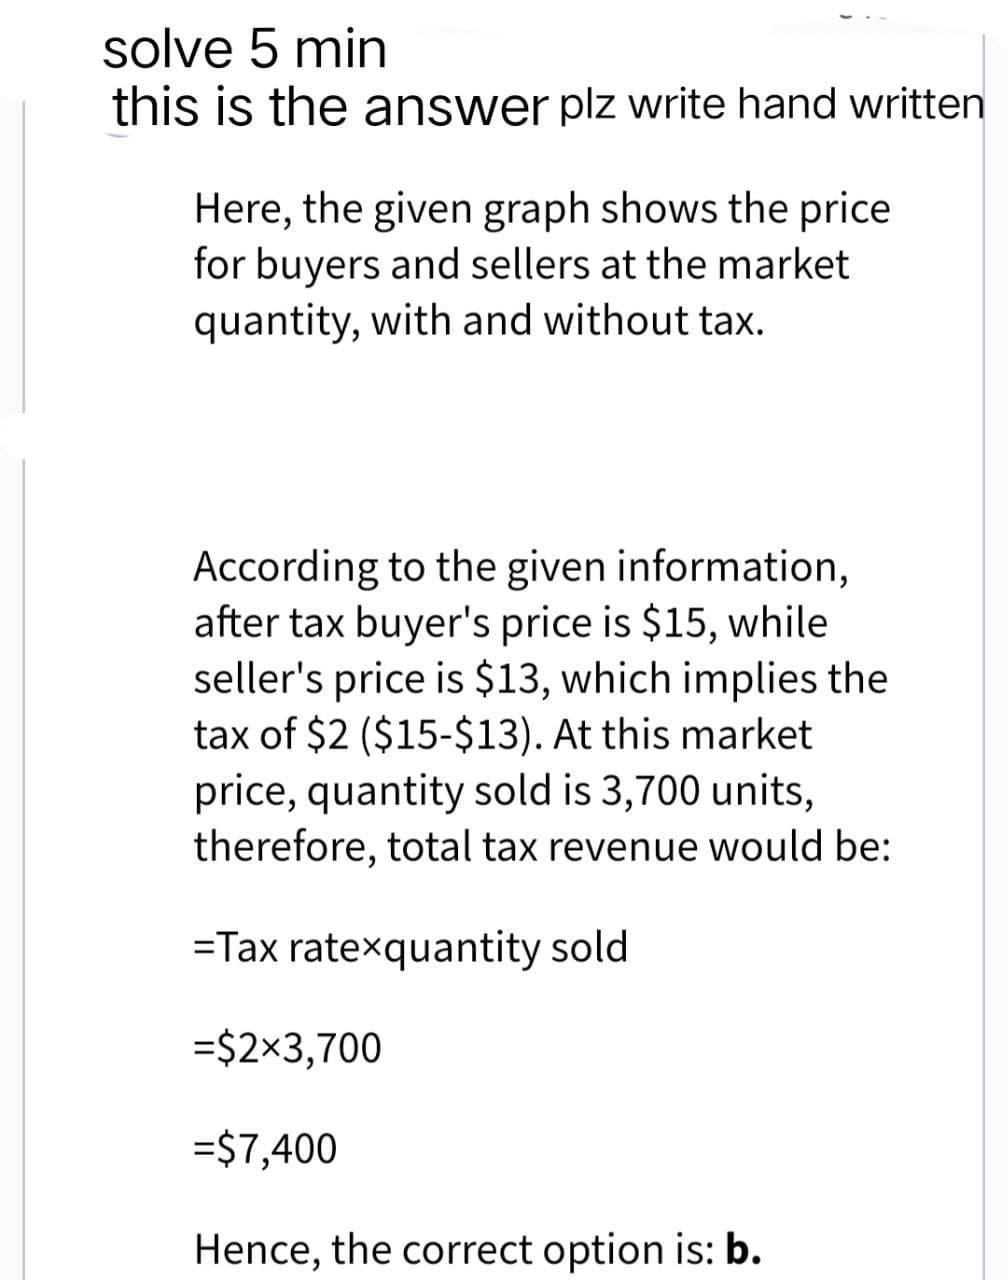 solve 5 min
this is the answer plz write hand written
Here, the given graph shows the price
for buyers and sellers at the market
quantity, with and without tax.
According to the given information,
after tax buyer's price is $15, while
seller's price is $13, which implies the
tax of $2 ($15-$13). At this market
price, quantity sold is 3,700 units,
therefore, total tax revenue would be:
=Tax ratexquantity sold
=$2×3,700
=$7,400
Hence, the correct option is: b.